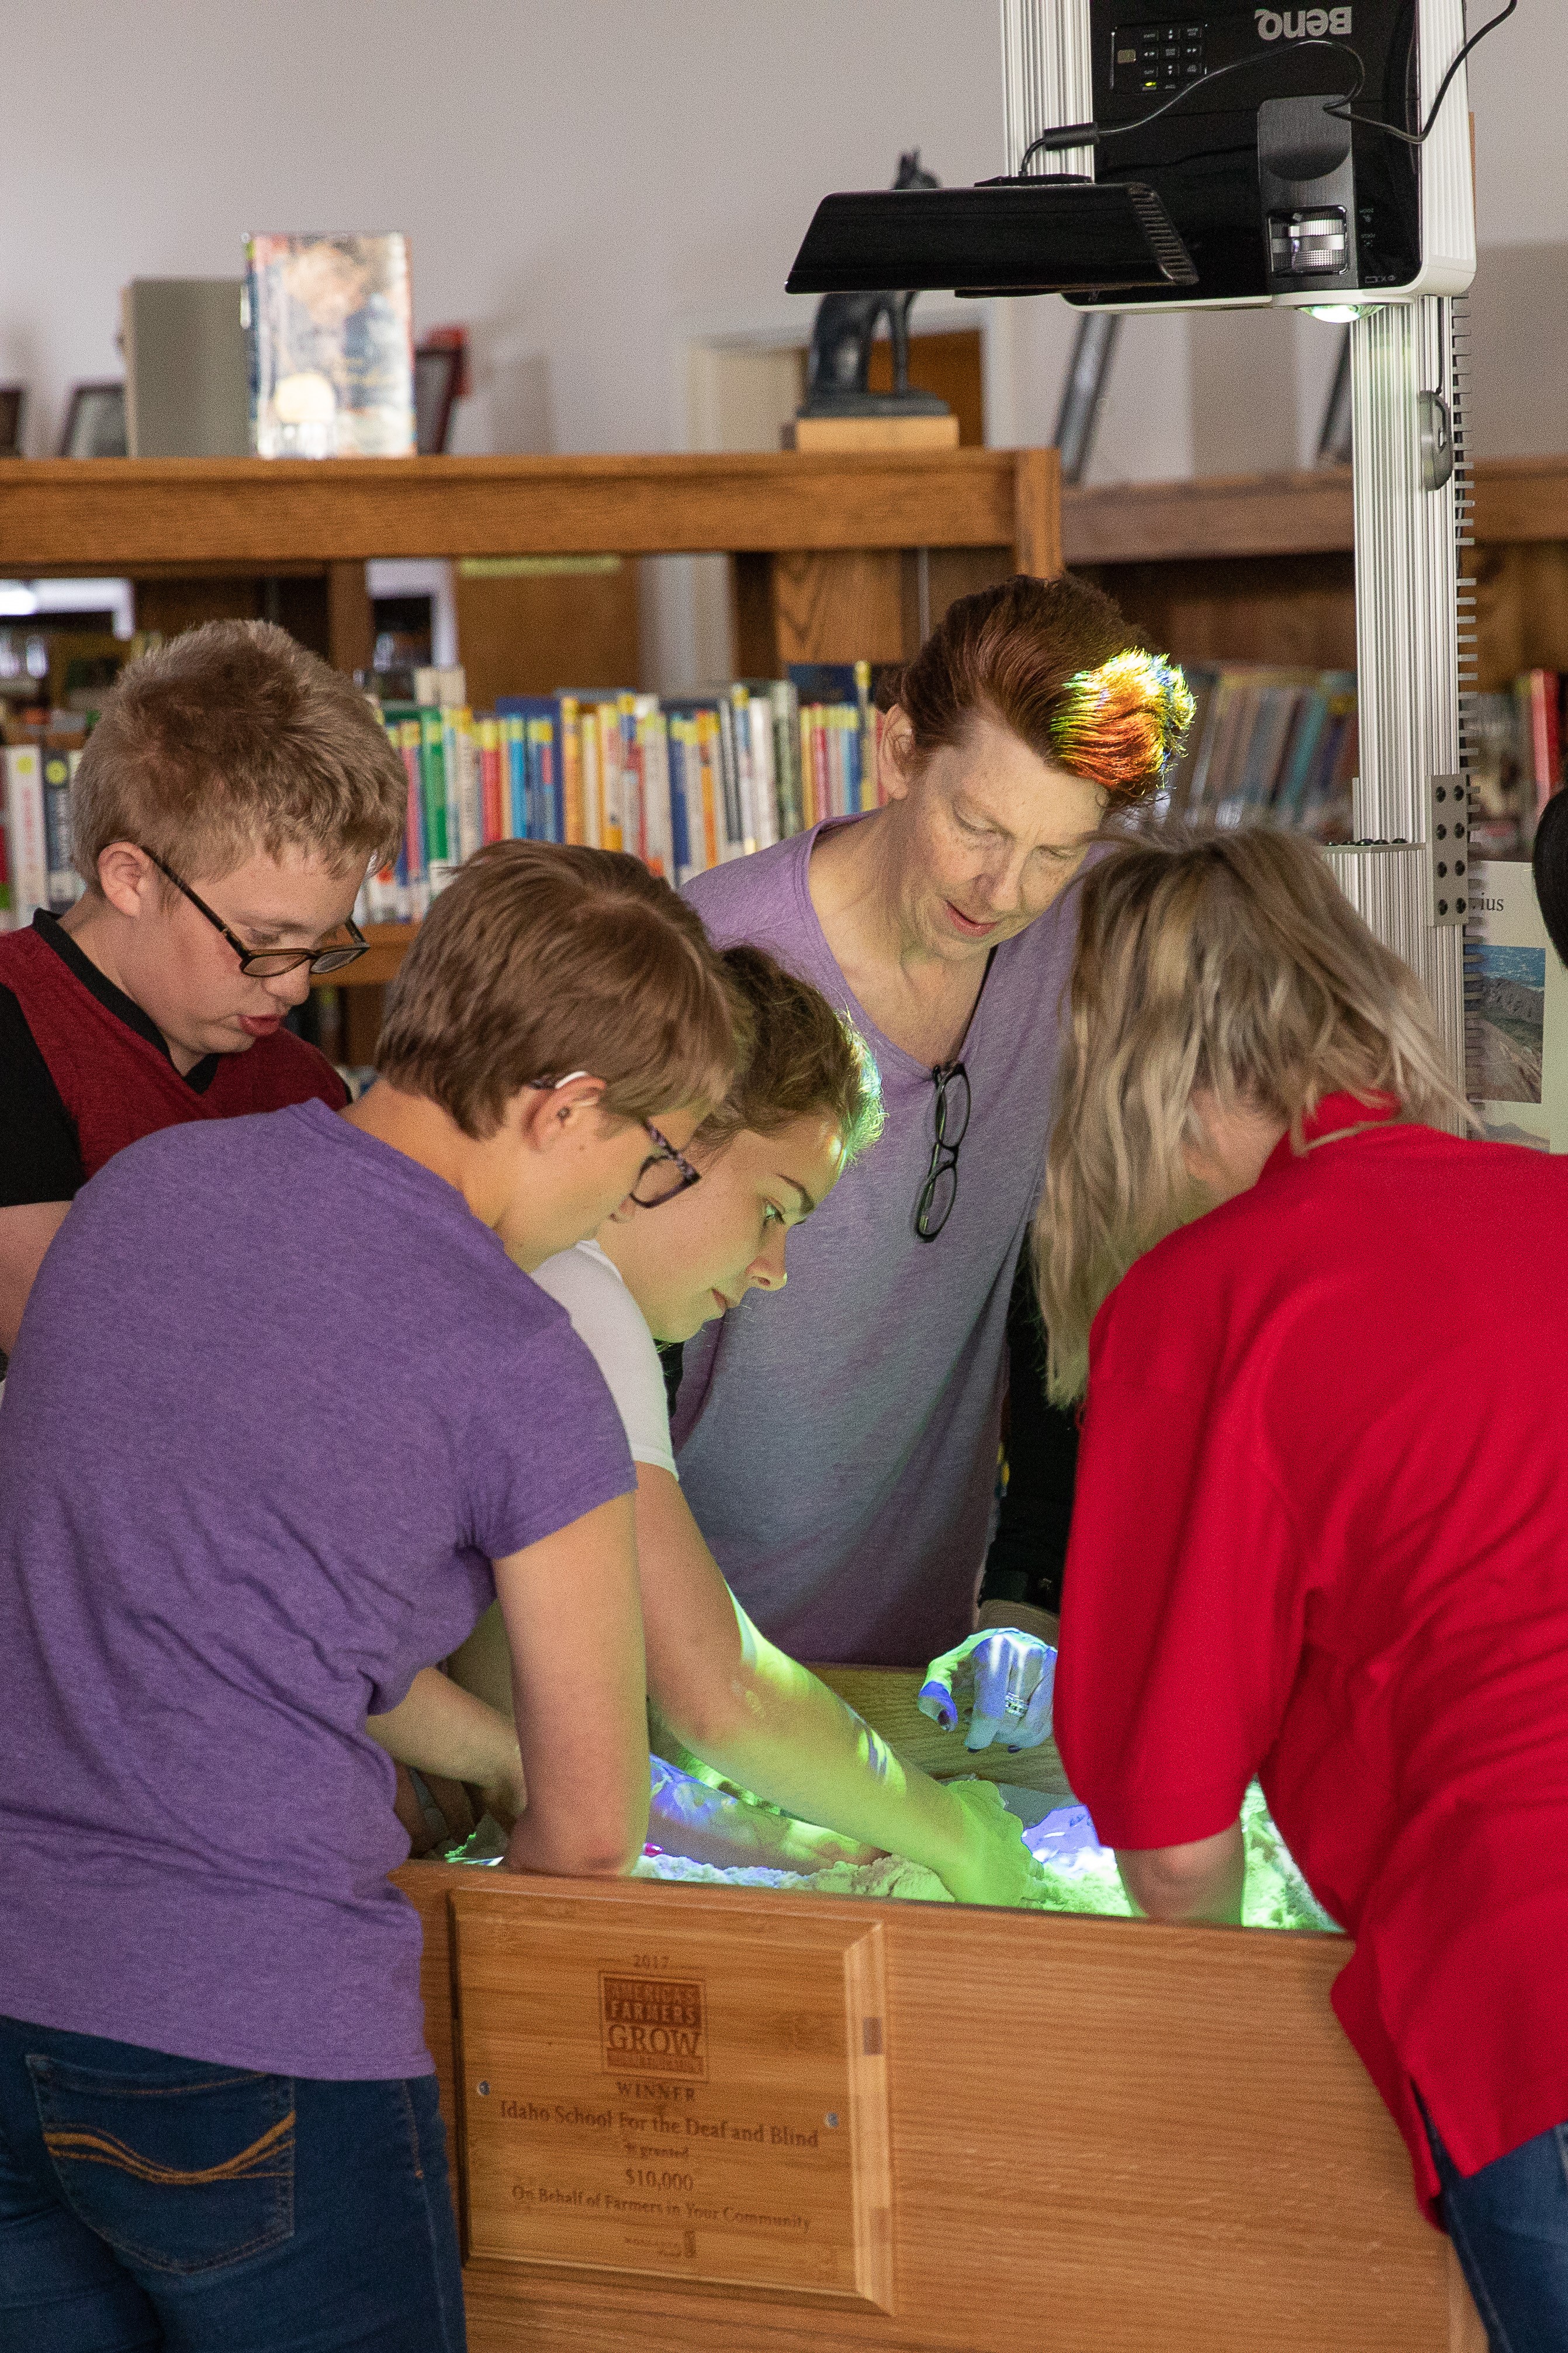 students explore with the augmented reality sandbox in the library